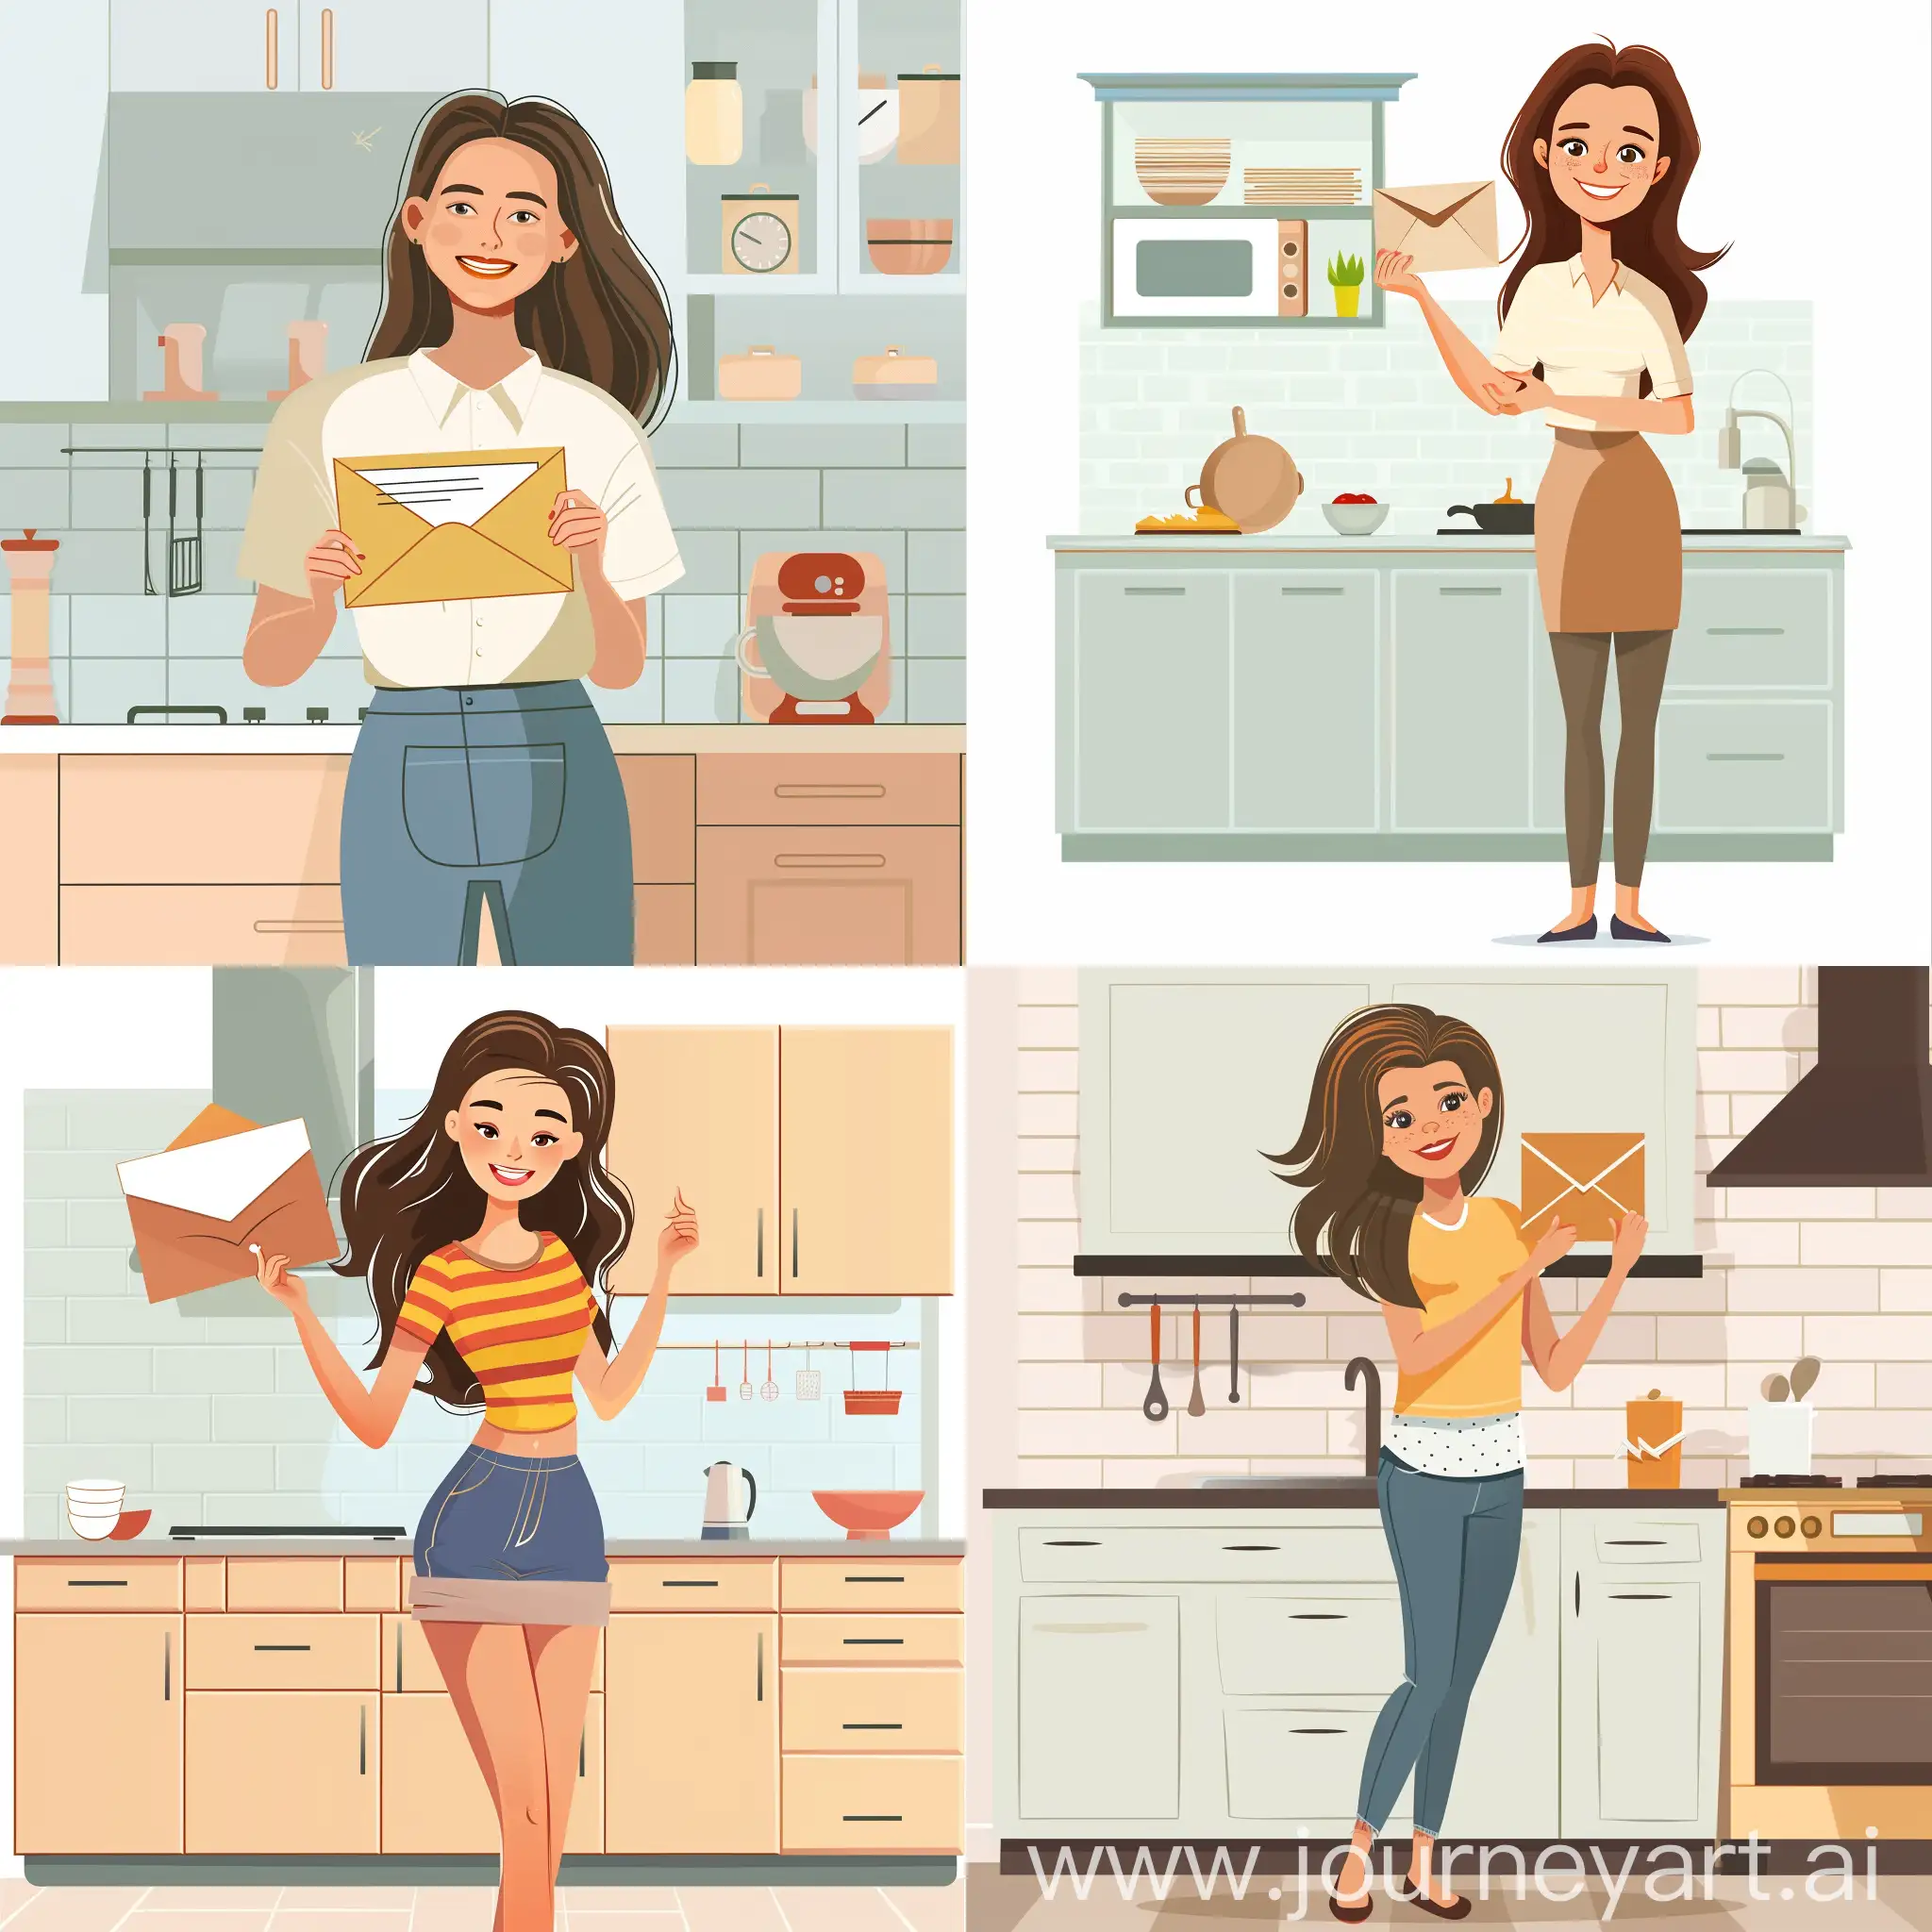 cartoonish woman standing in the kitchen holding a while letter envelope smiling